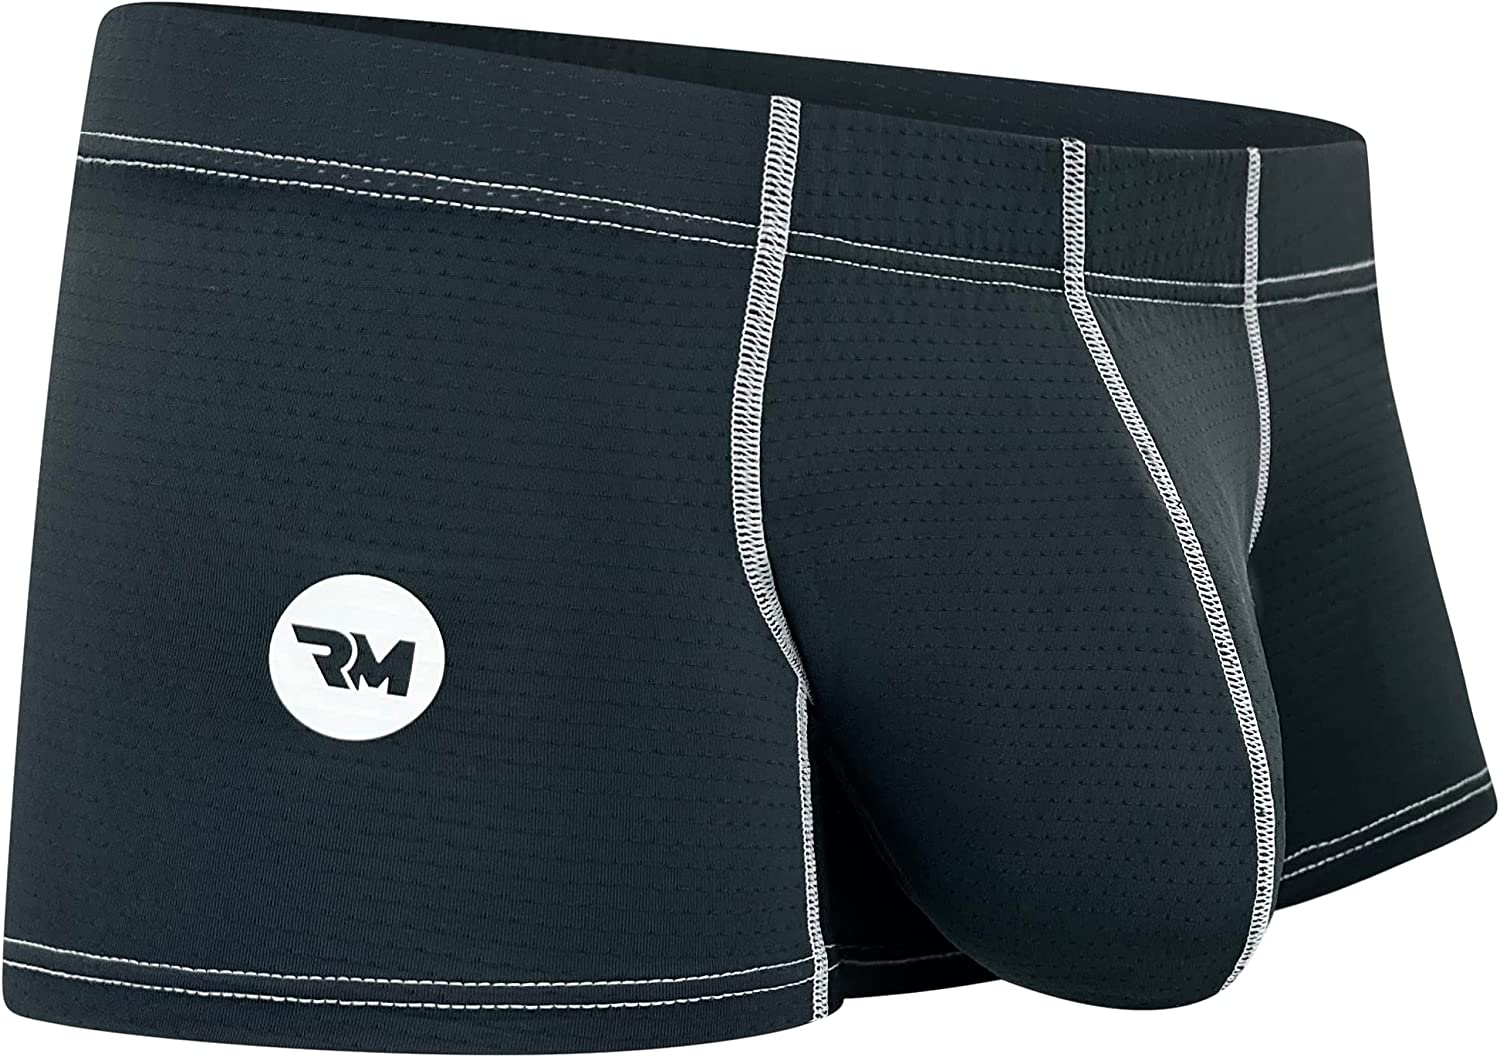 Men's Large Pouch Underwear by Real Men - A Review